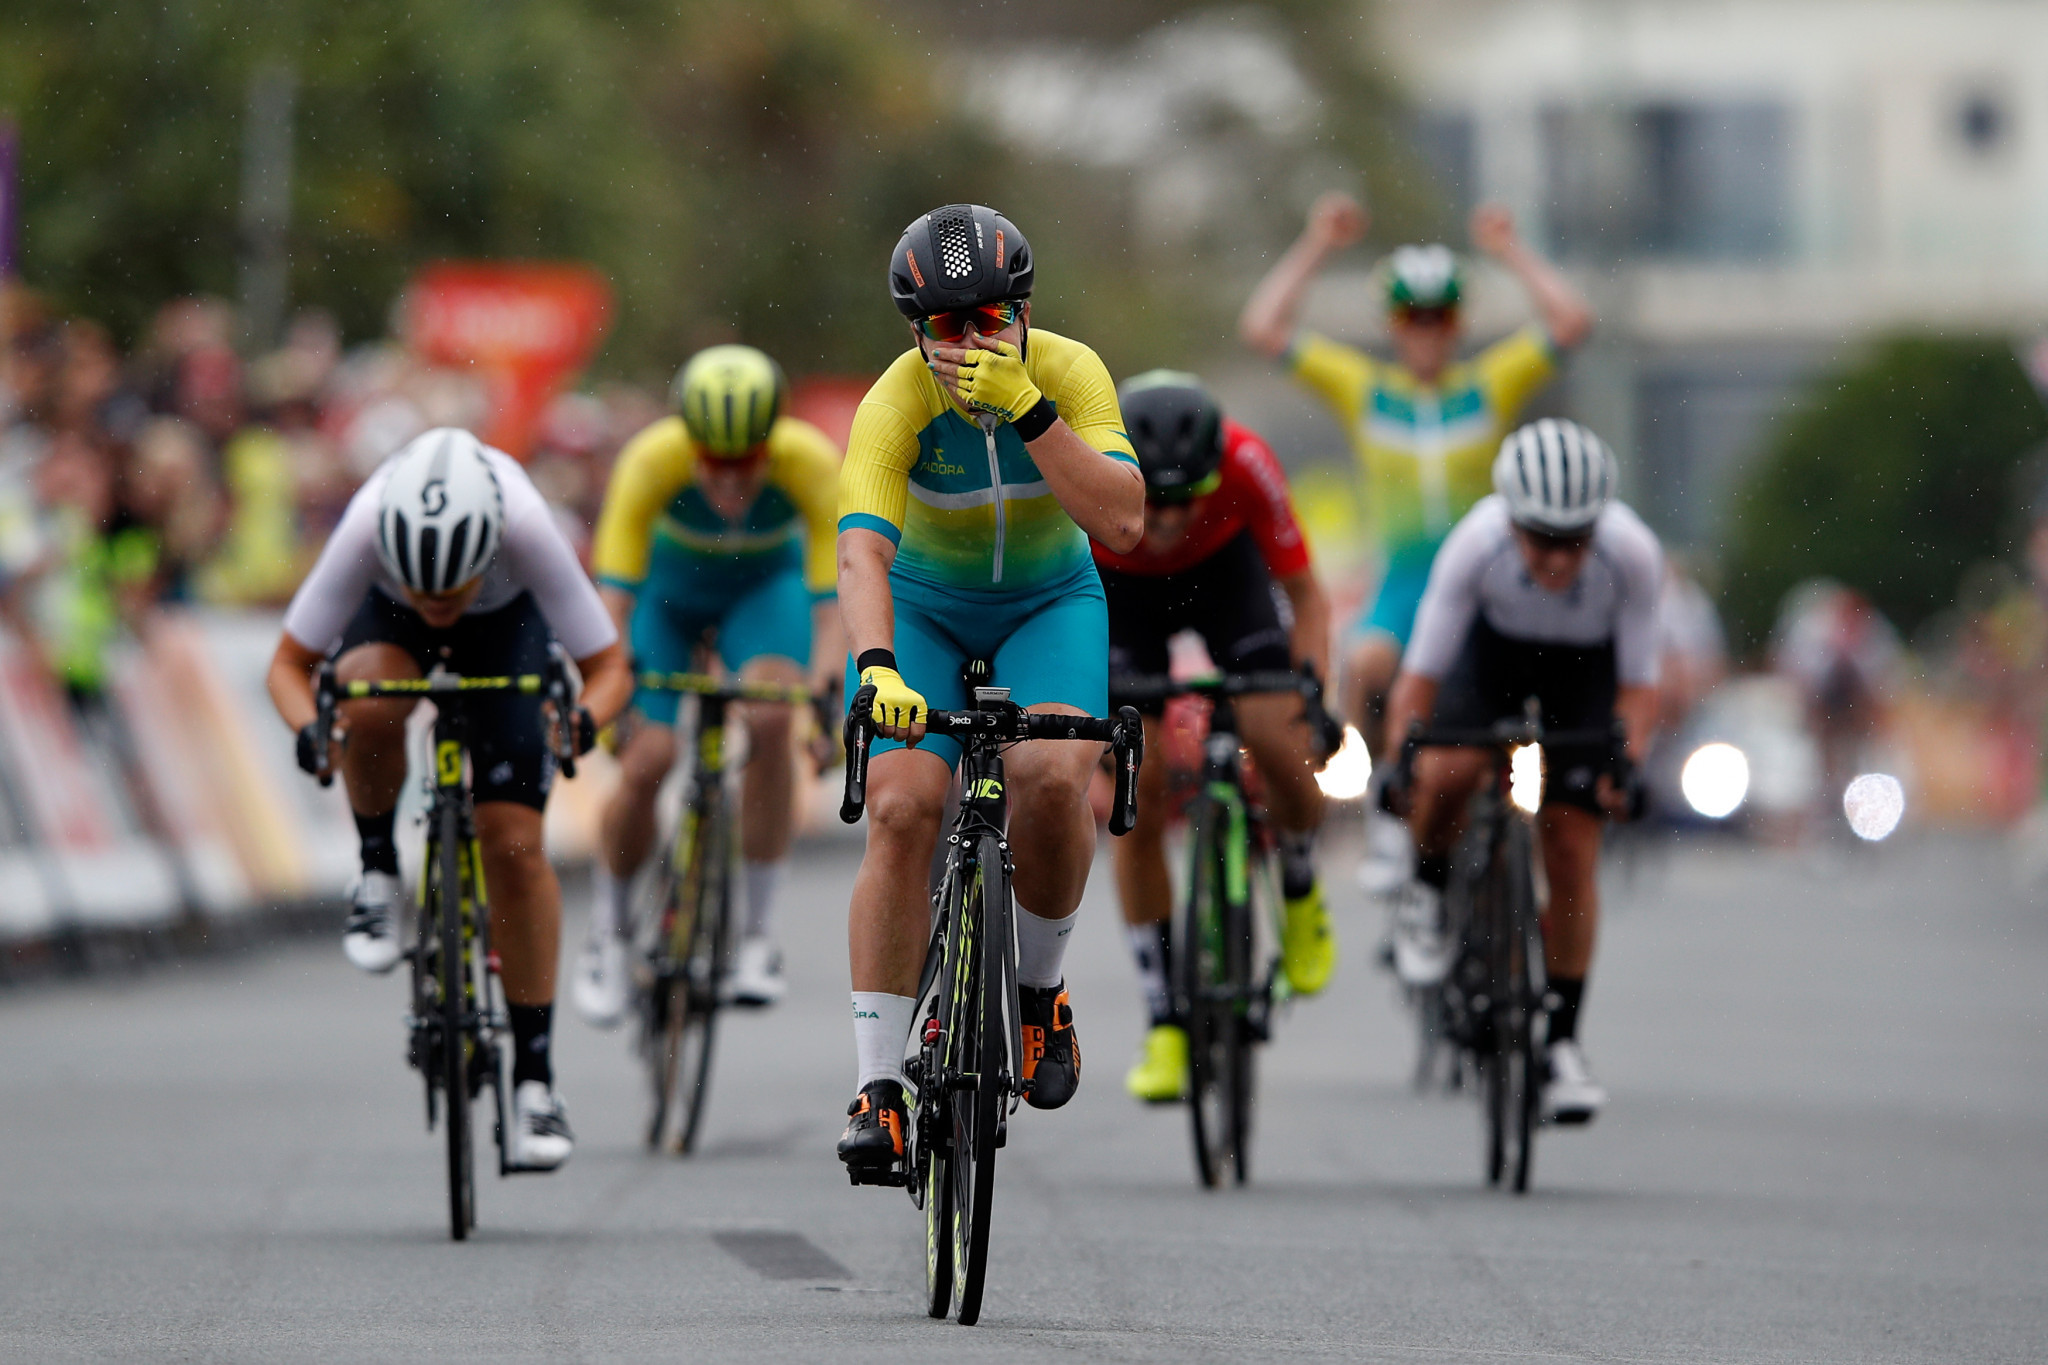 Chloe Hosking sprinted to victory in the women's road race ©Getty Images